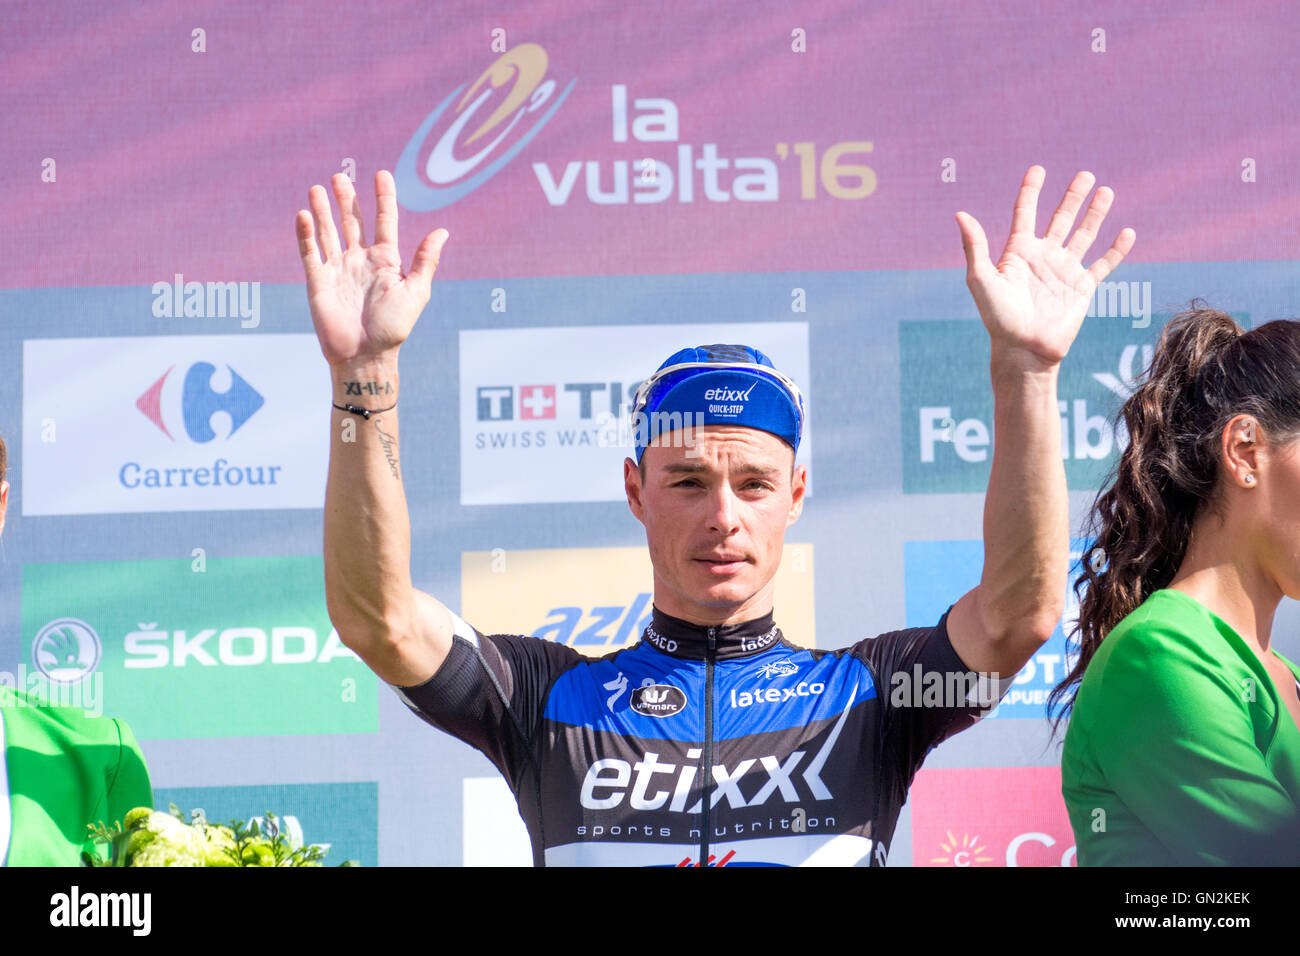 La Camperona, Spain. 27th August, 2016. Gianni Meersman (Ettix - Quick Step) with points maillot at the podium of 8th stage of cycling race ‘La Vuelta a España’ (Tour of Spain) between Villalpando and Climb of La Camperona on August 27, 2016 in Leon, Spain. Credit: David Gato/Alamy Live News Stock Photo